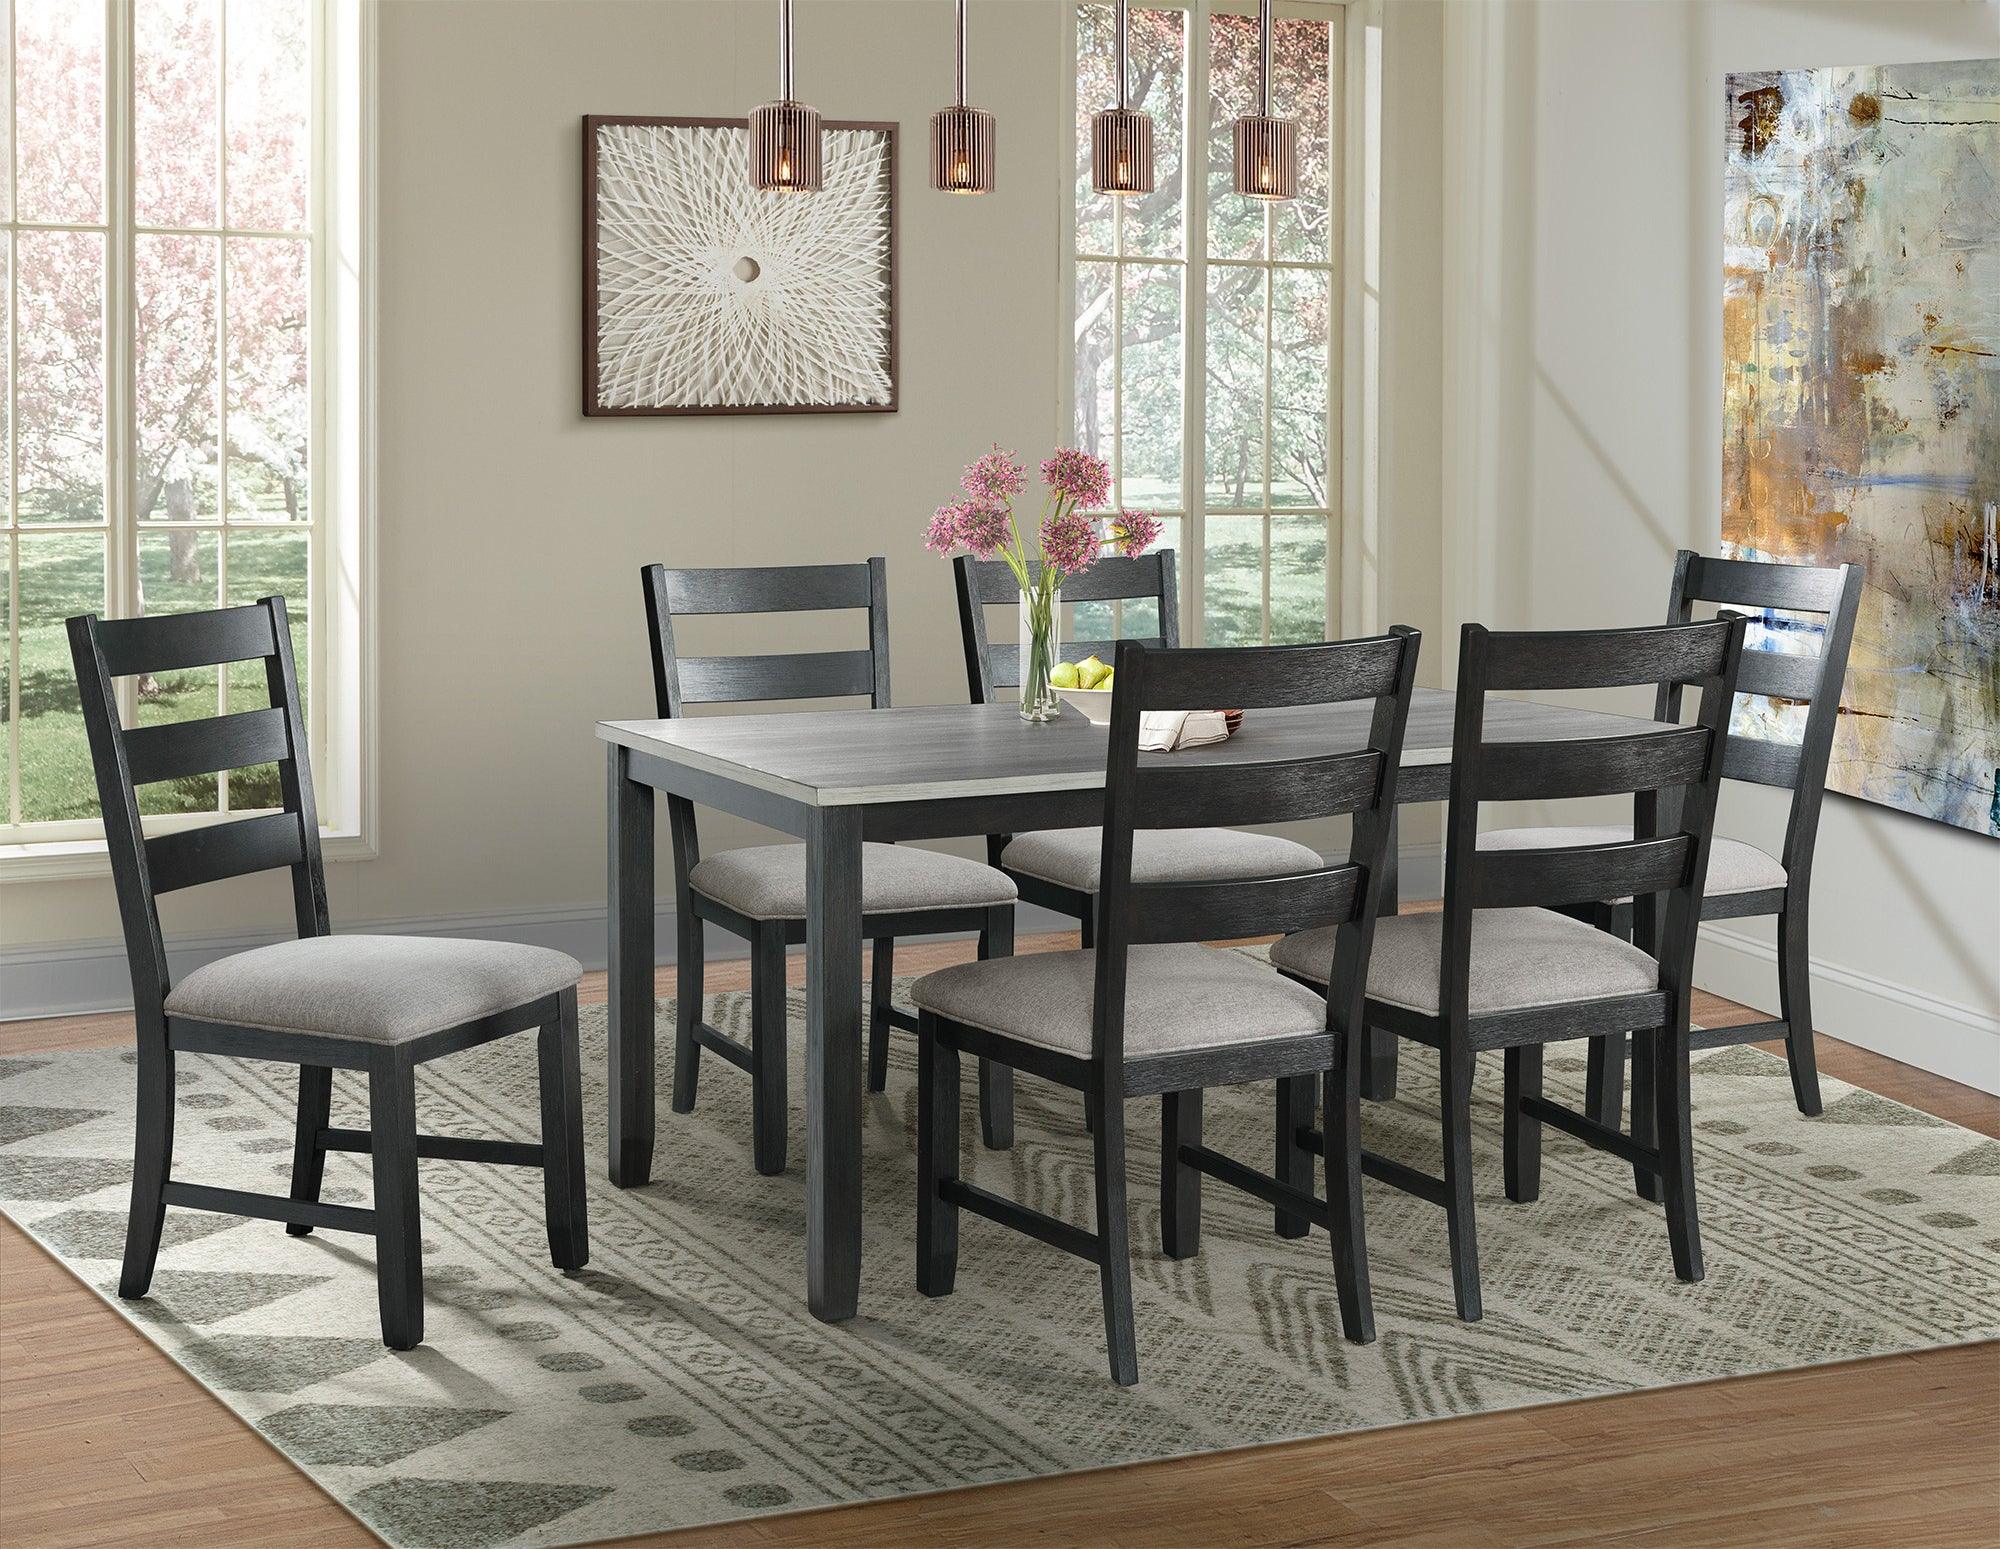 Elements Dining Chairs - Kona Standard Height Side Chair Set in Black